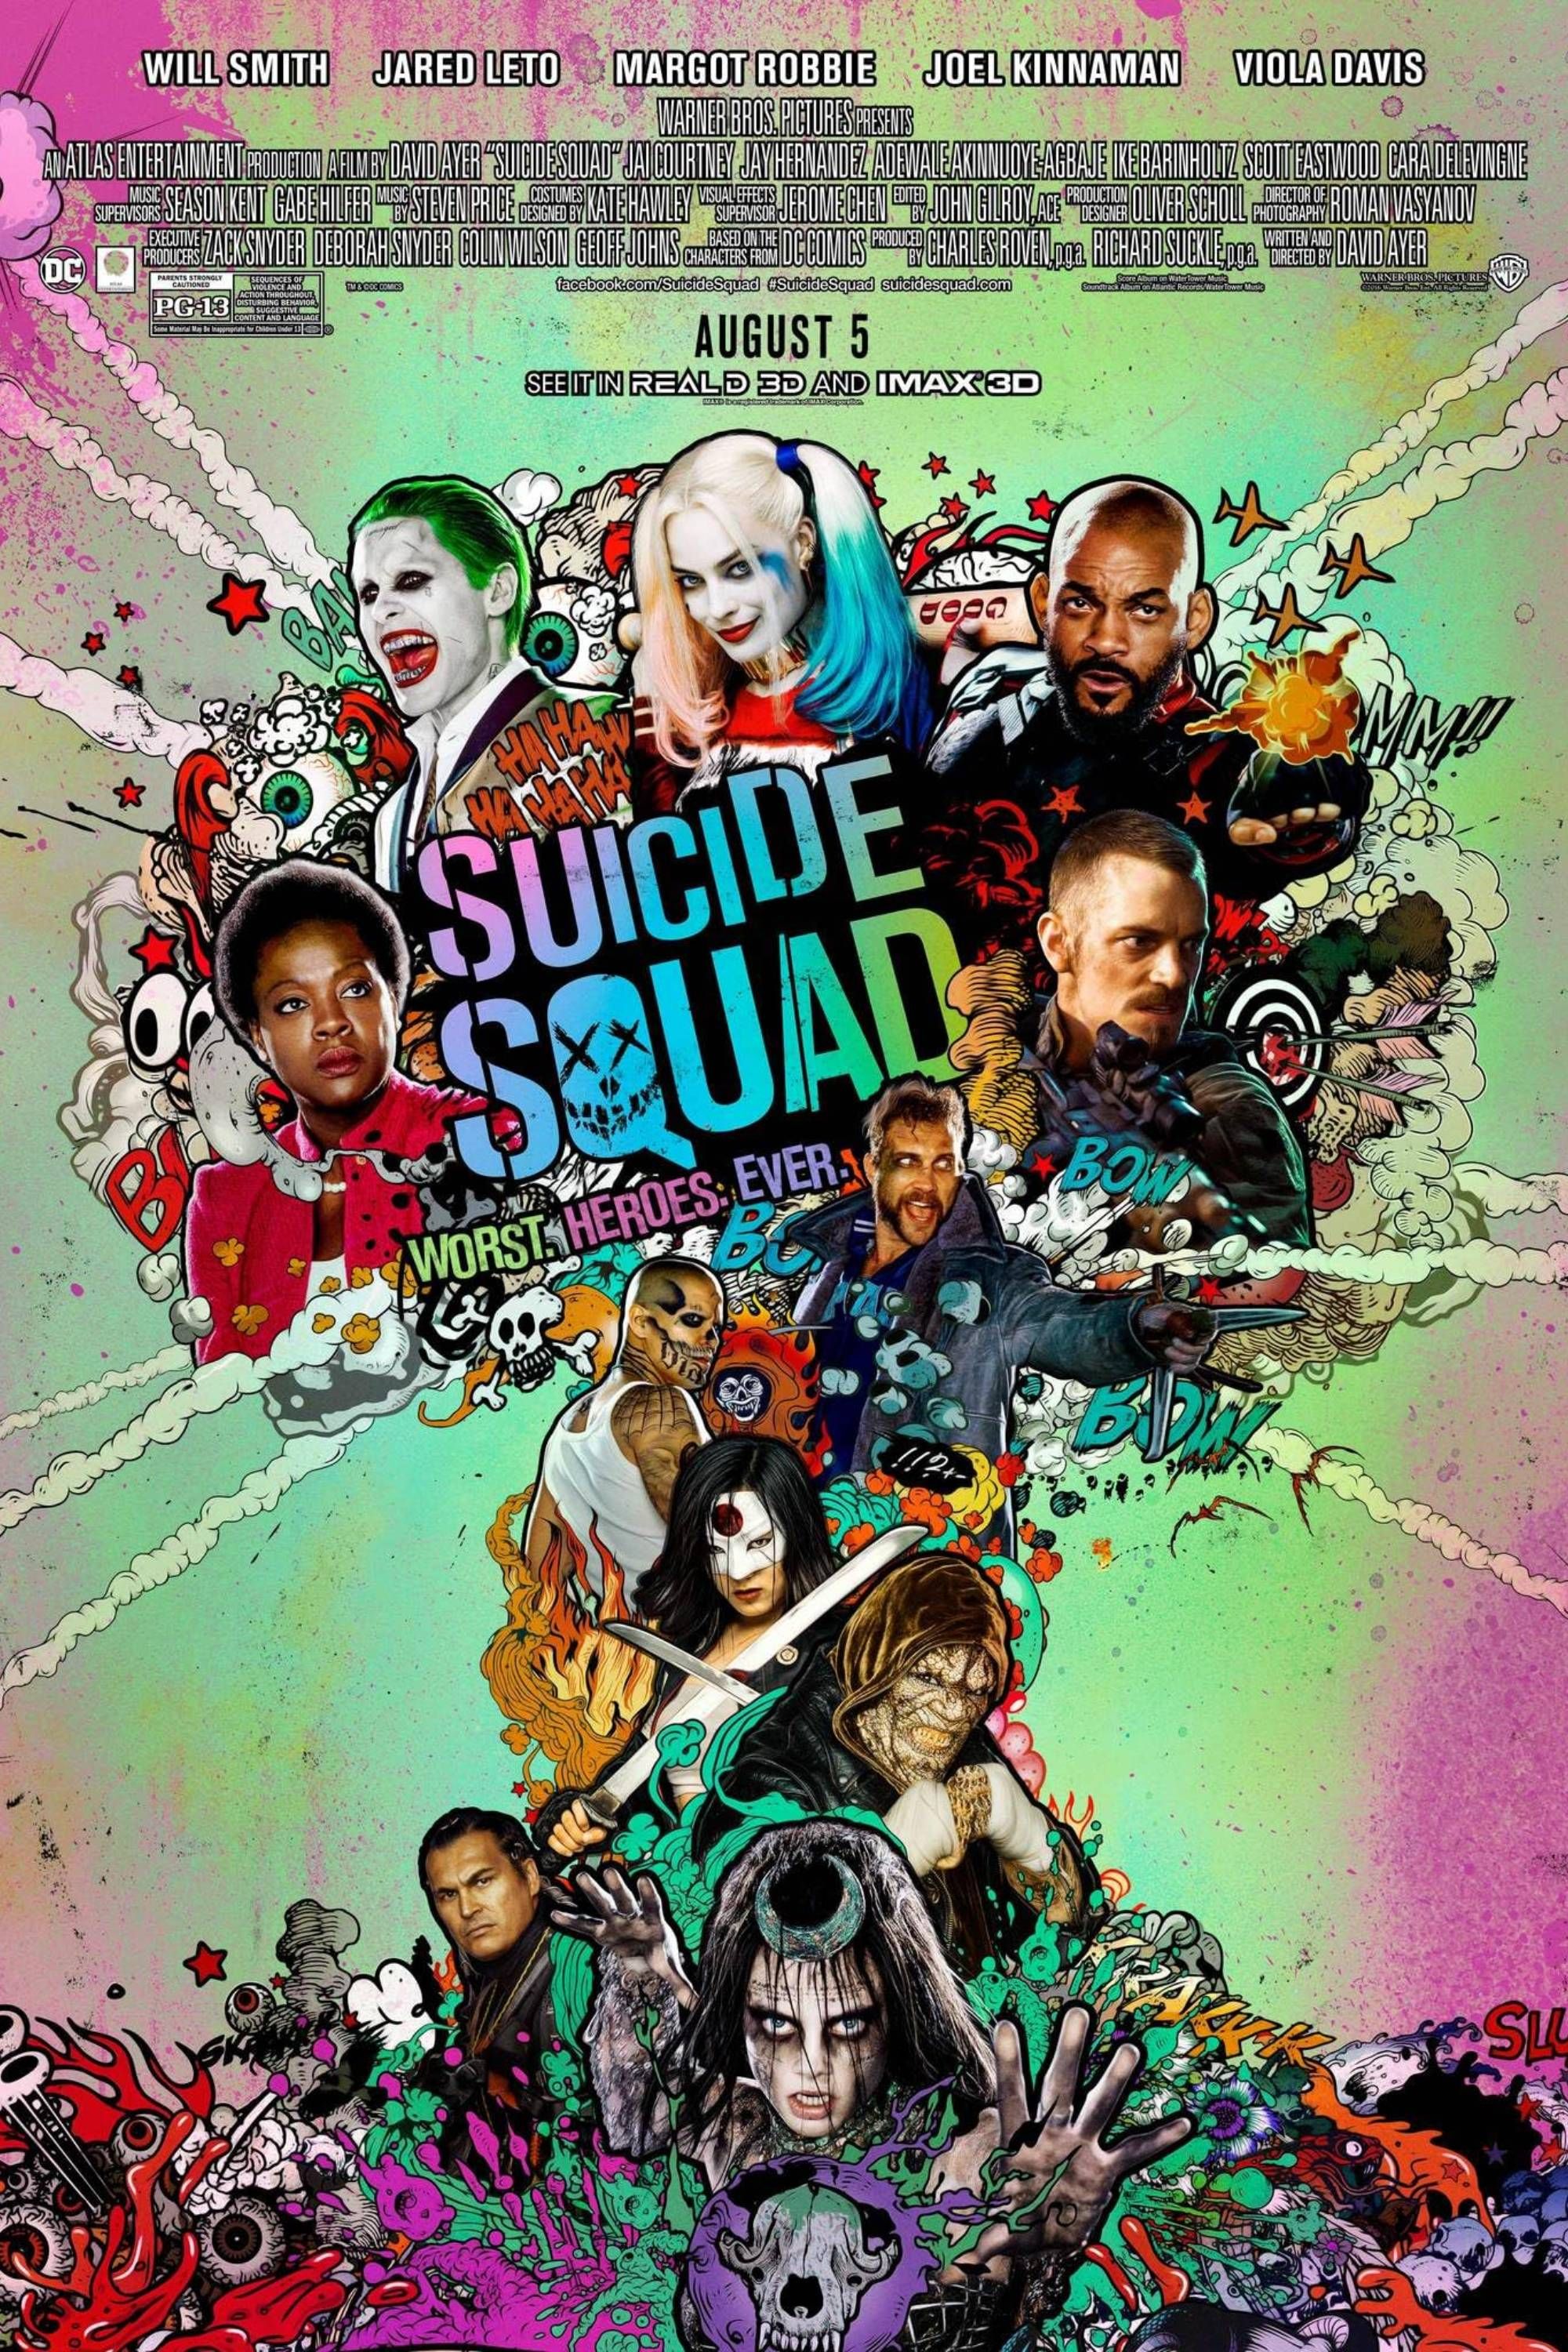 Suicide Squad Theatrical Poster